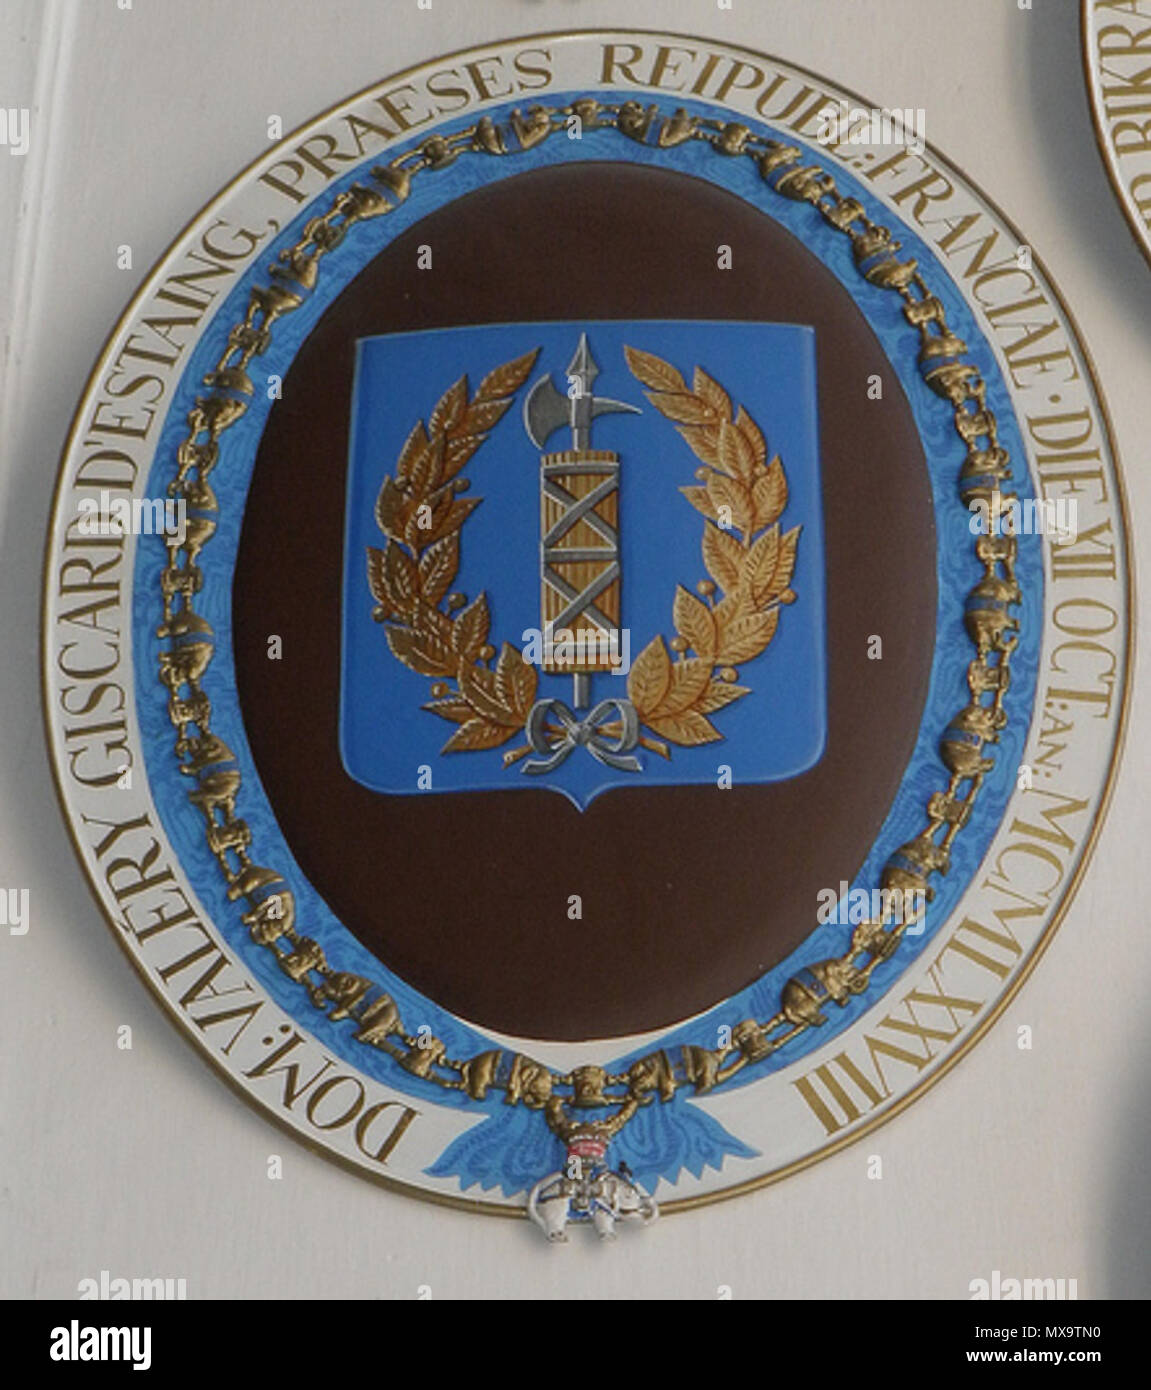 . English: Stall plate of Valery Giscard d'Estaing, President of France, as a Knight of the Order of the Elephant . 28 August 2013, 19:20:43. Jorgen Pedersen 247 Vgearms2 Stock Photo